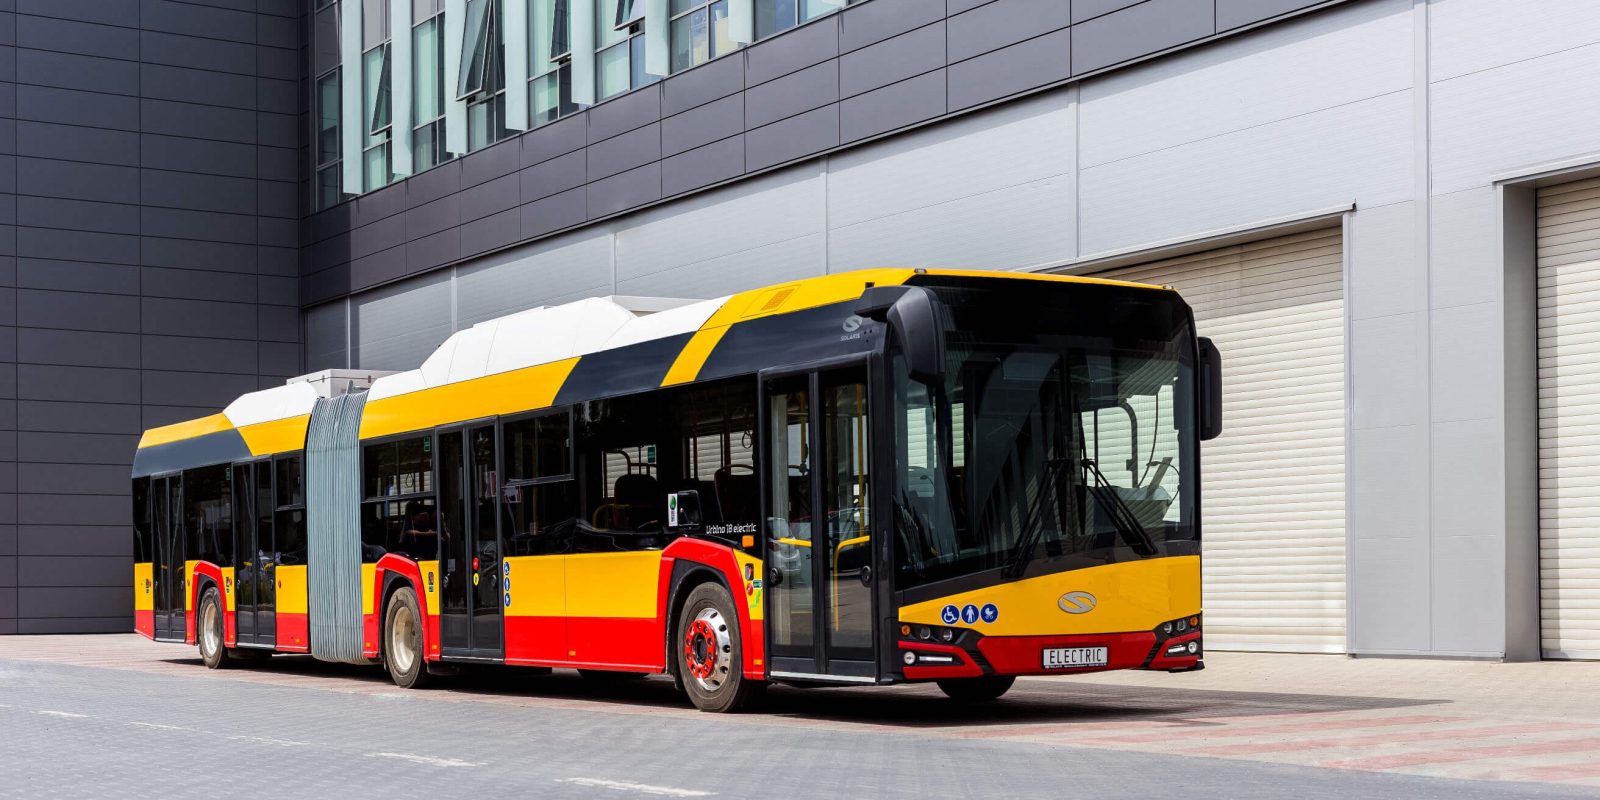 Warsaw ordered 130 articulated electric buses from Solaris